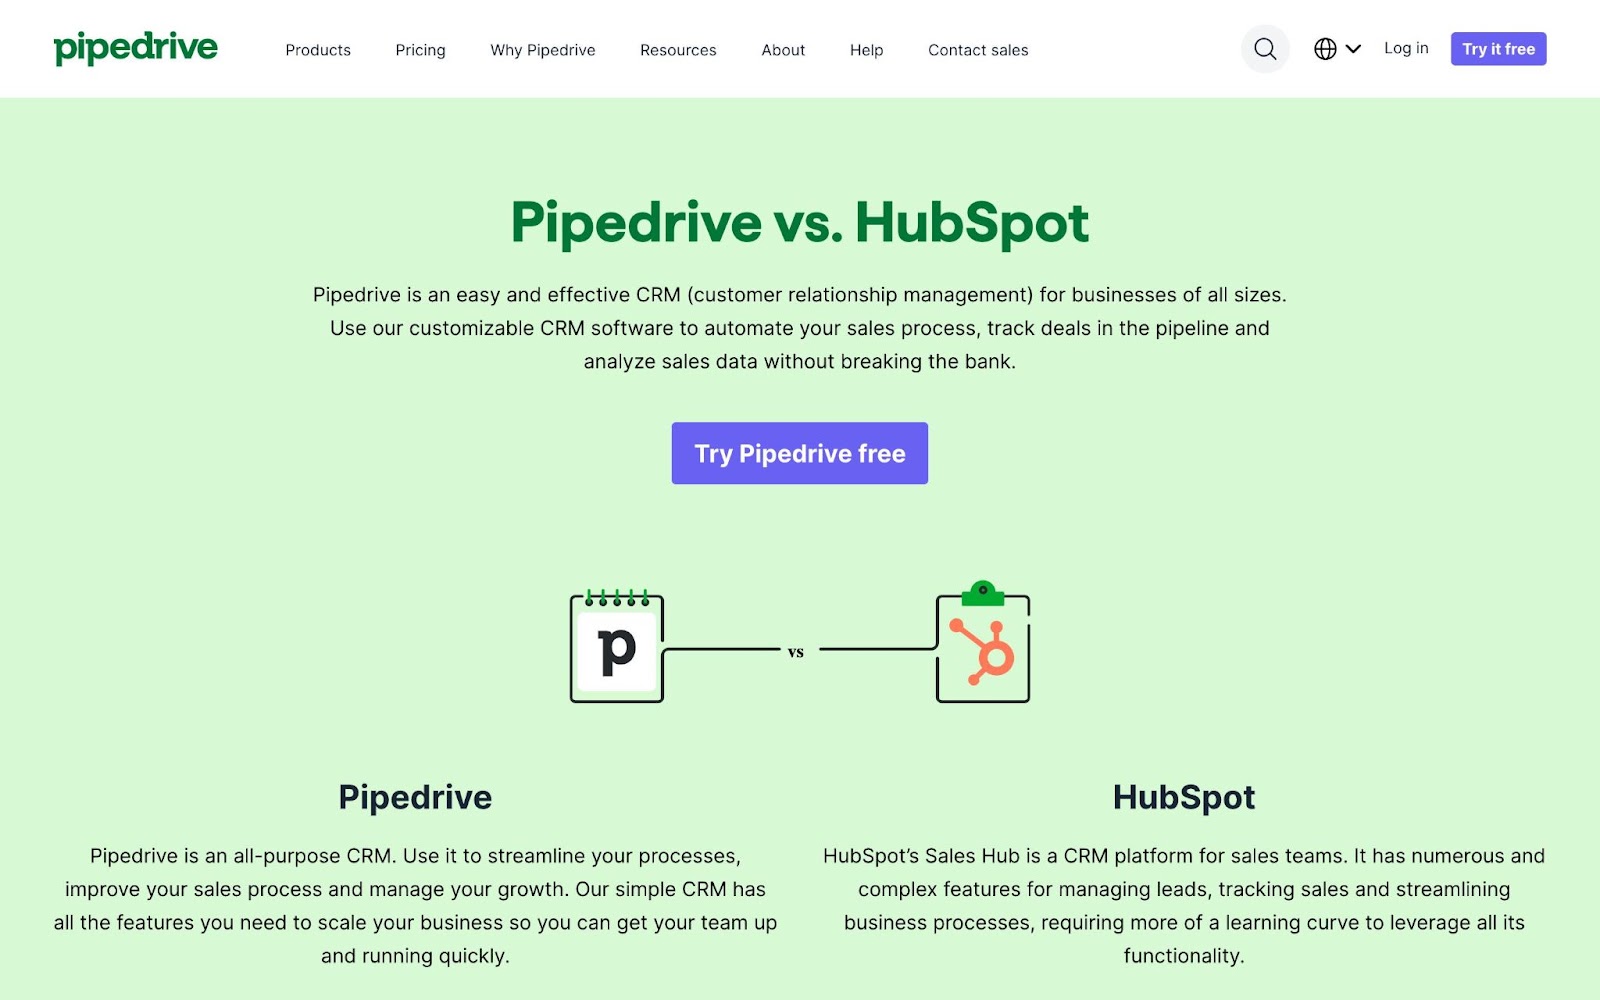 Pipedrive vs. HubSpot landing page